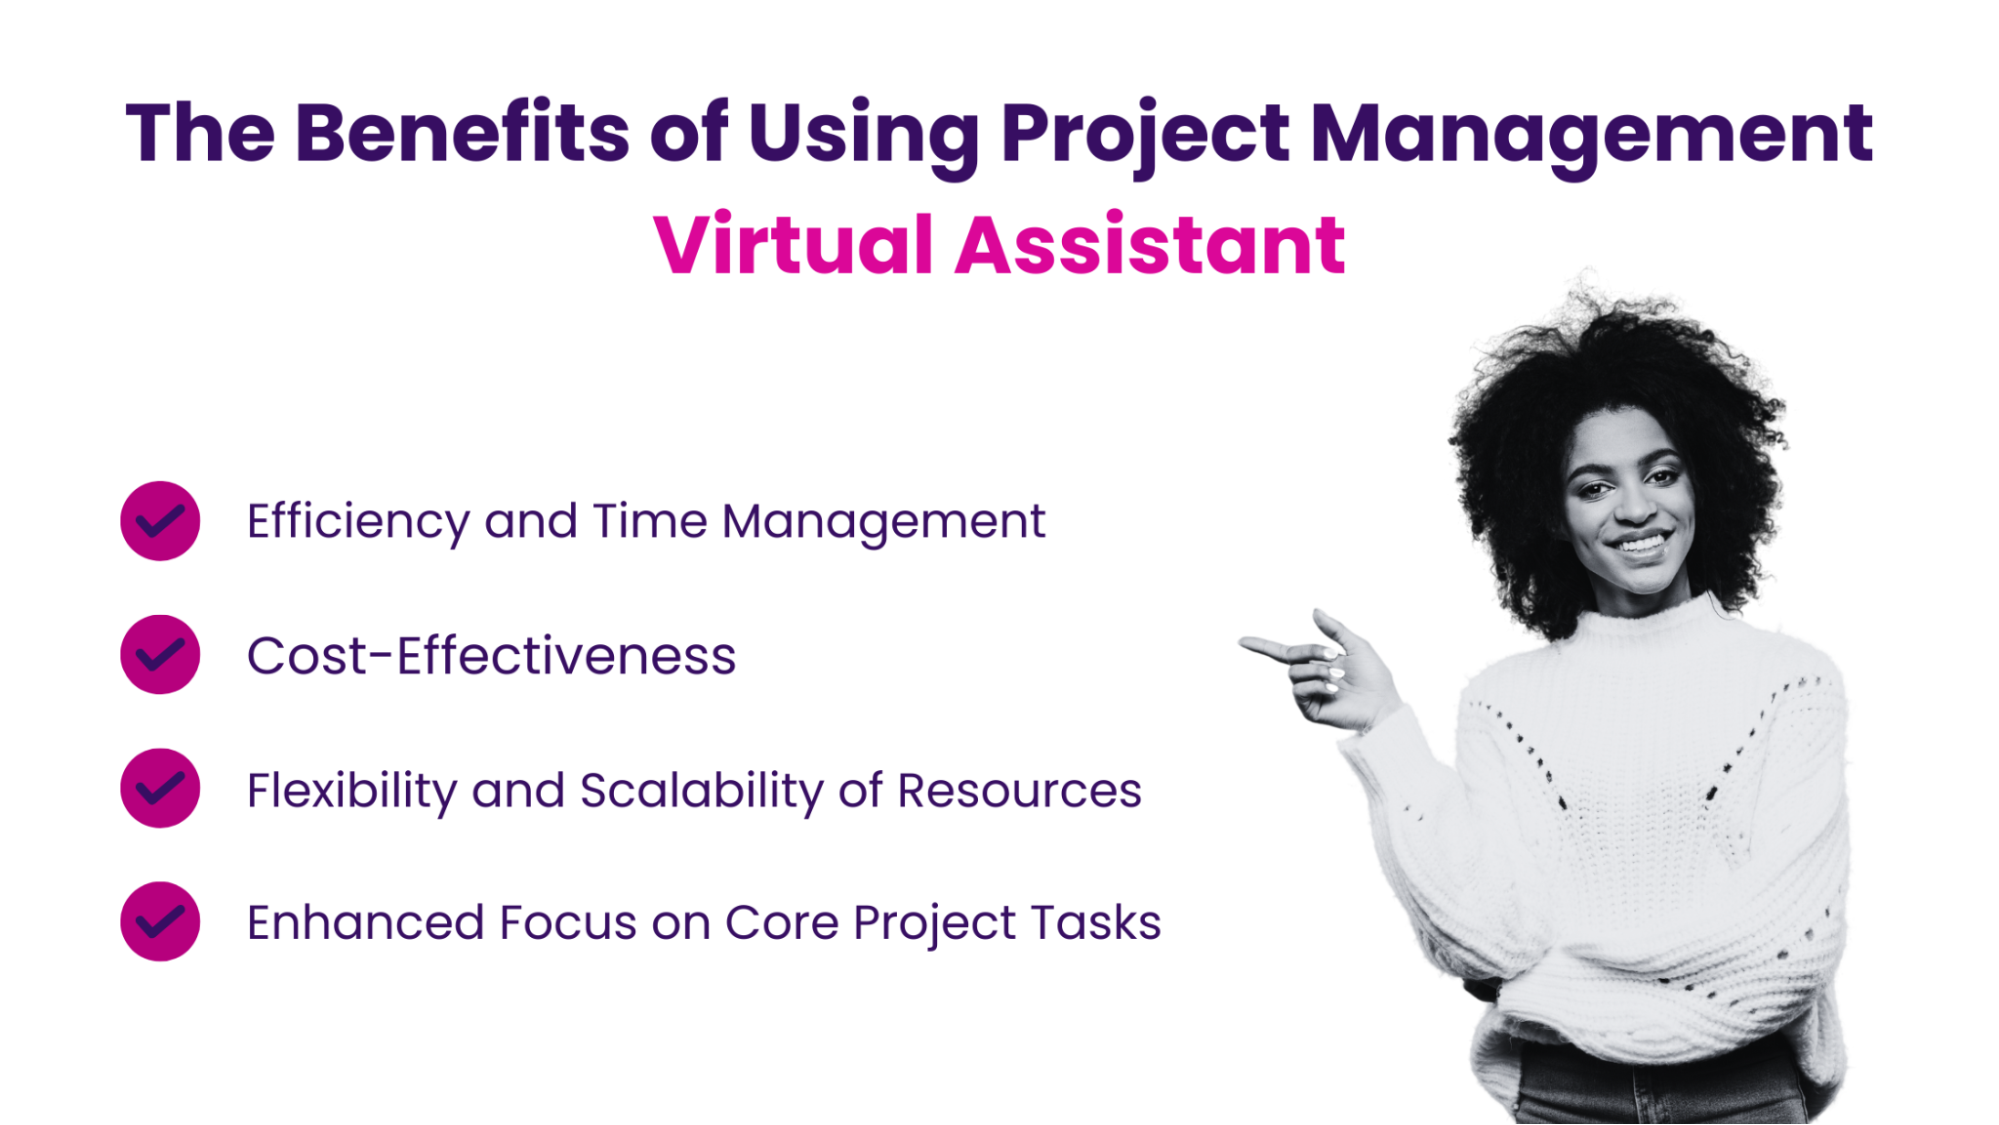 The Benefits of Using Project Management Virtual Assistant